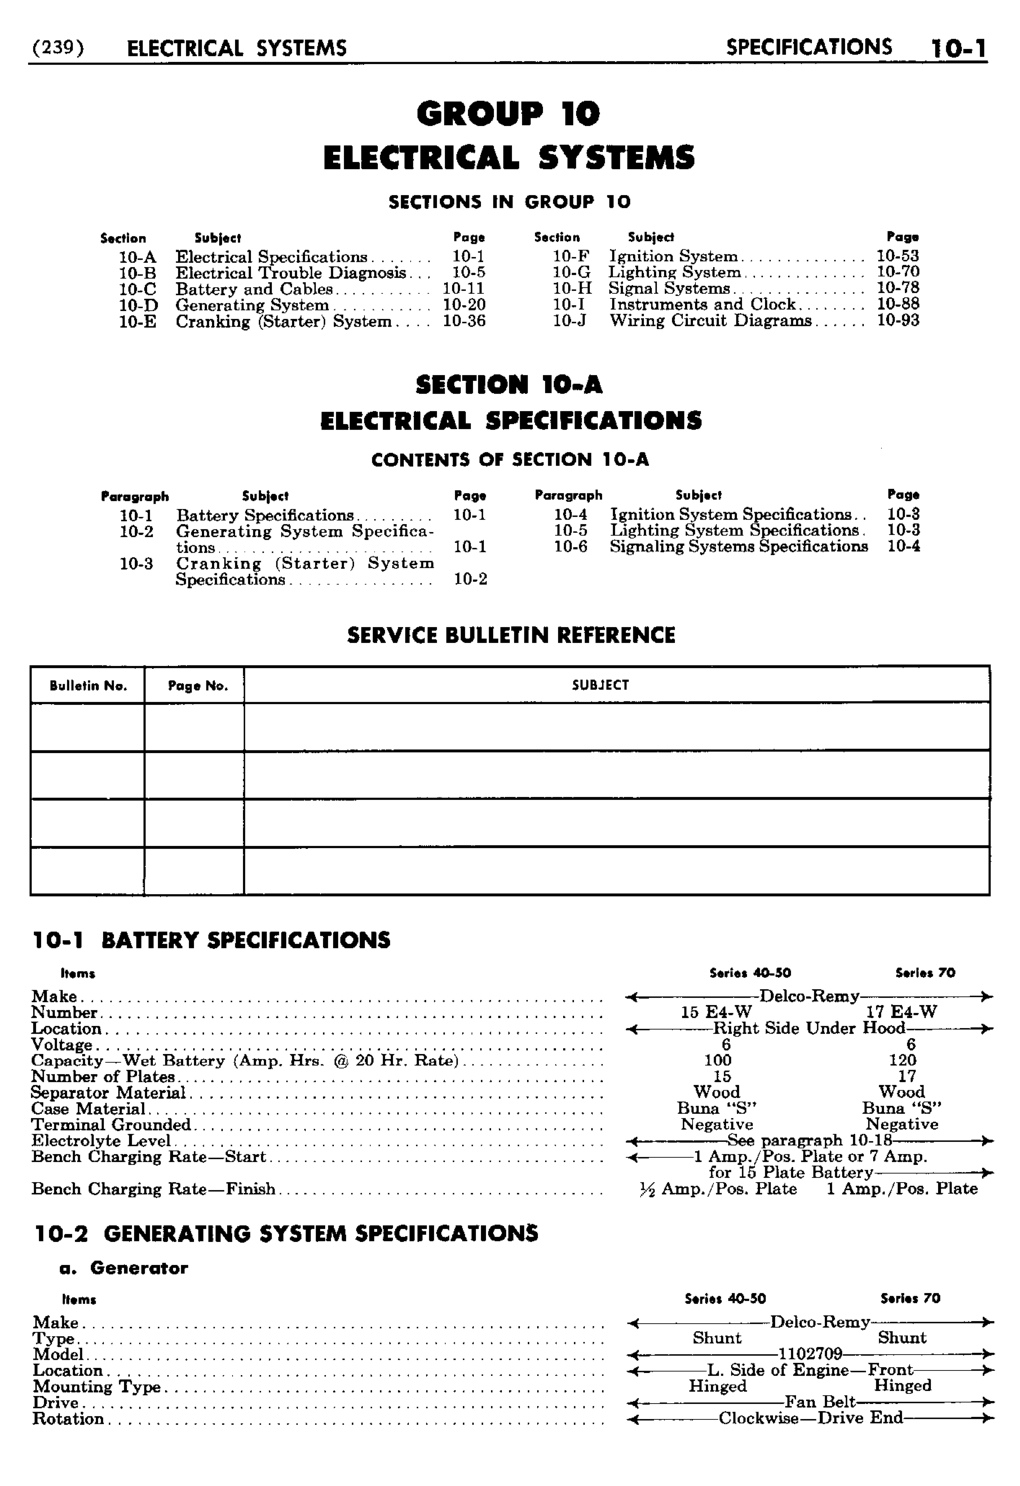 n_11 1950 Buick Shop Manual - Electrical Systems-001-001.jpg